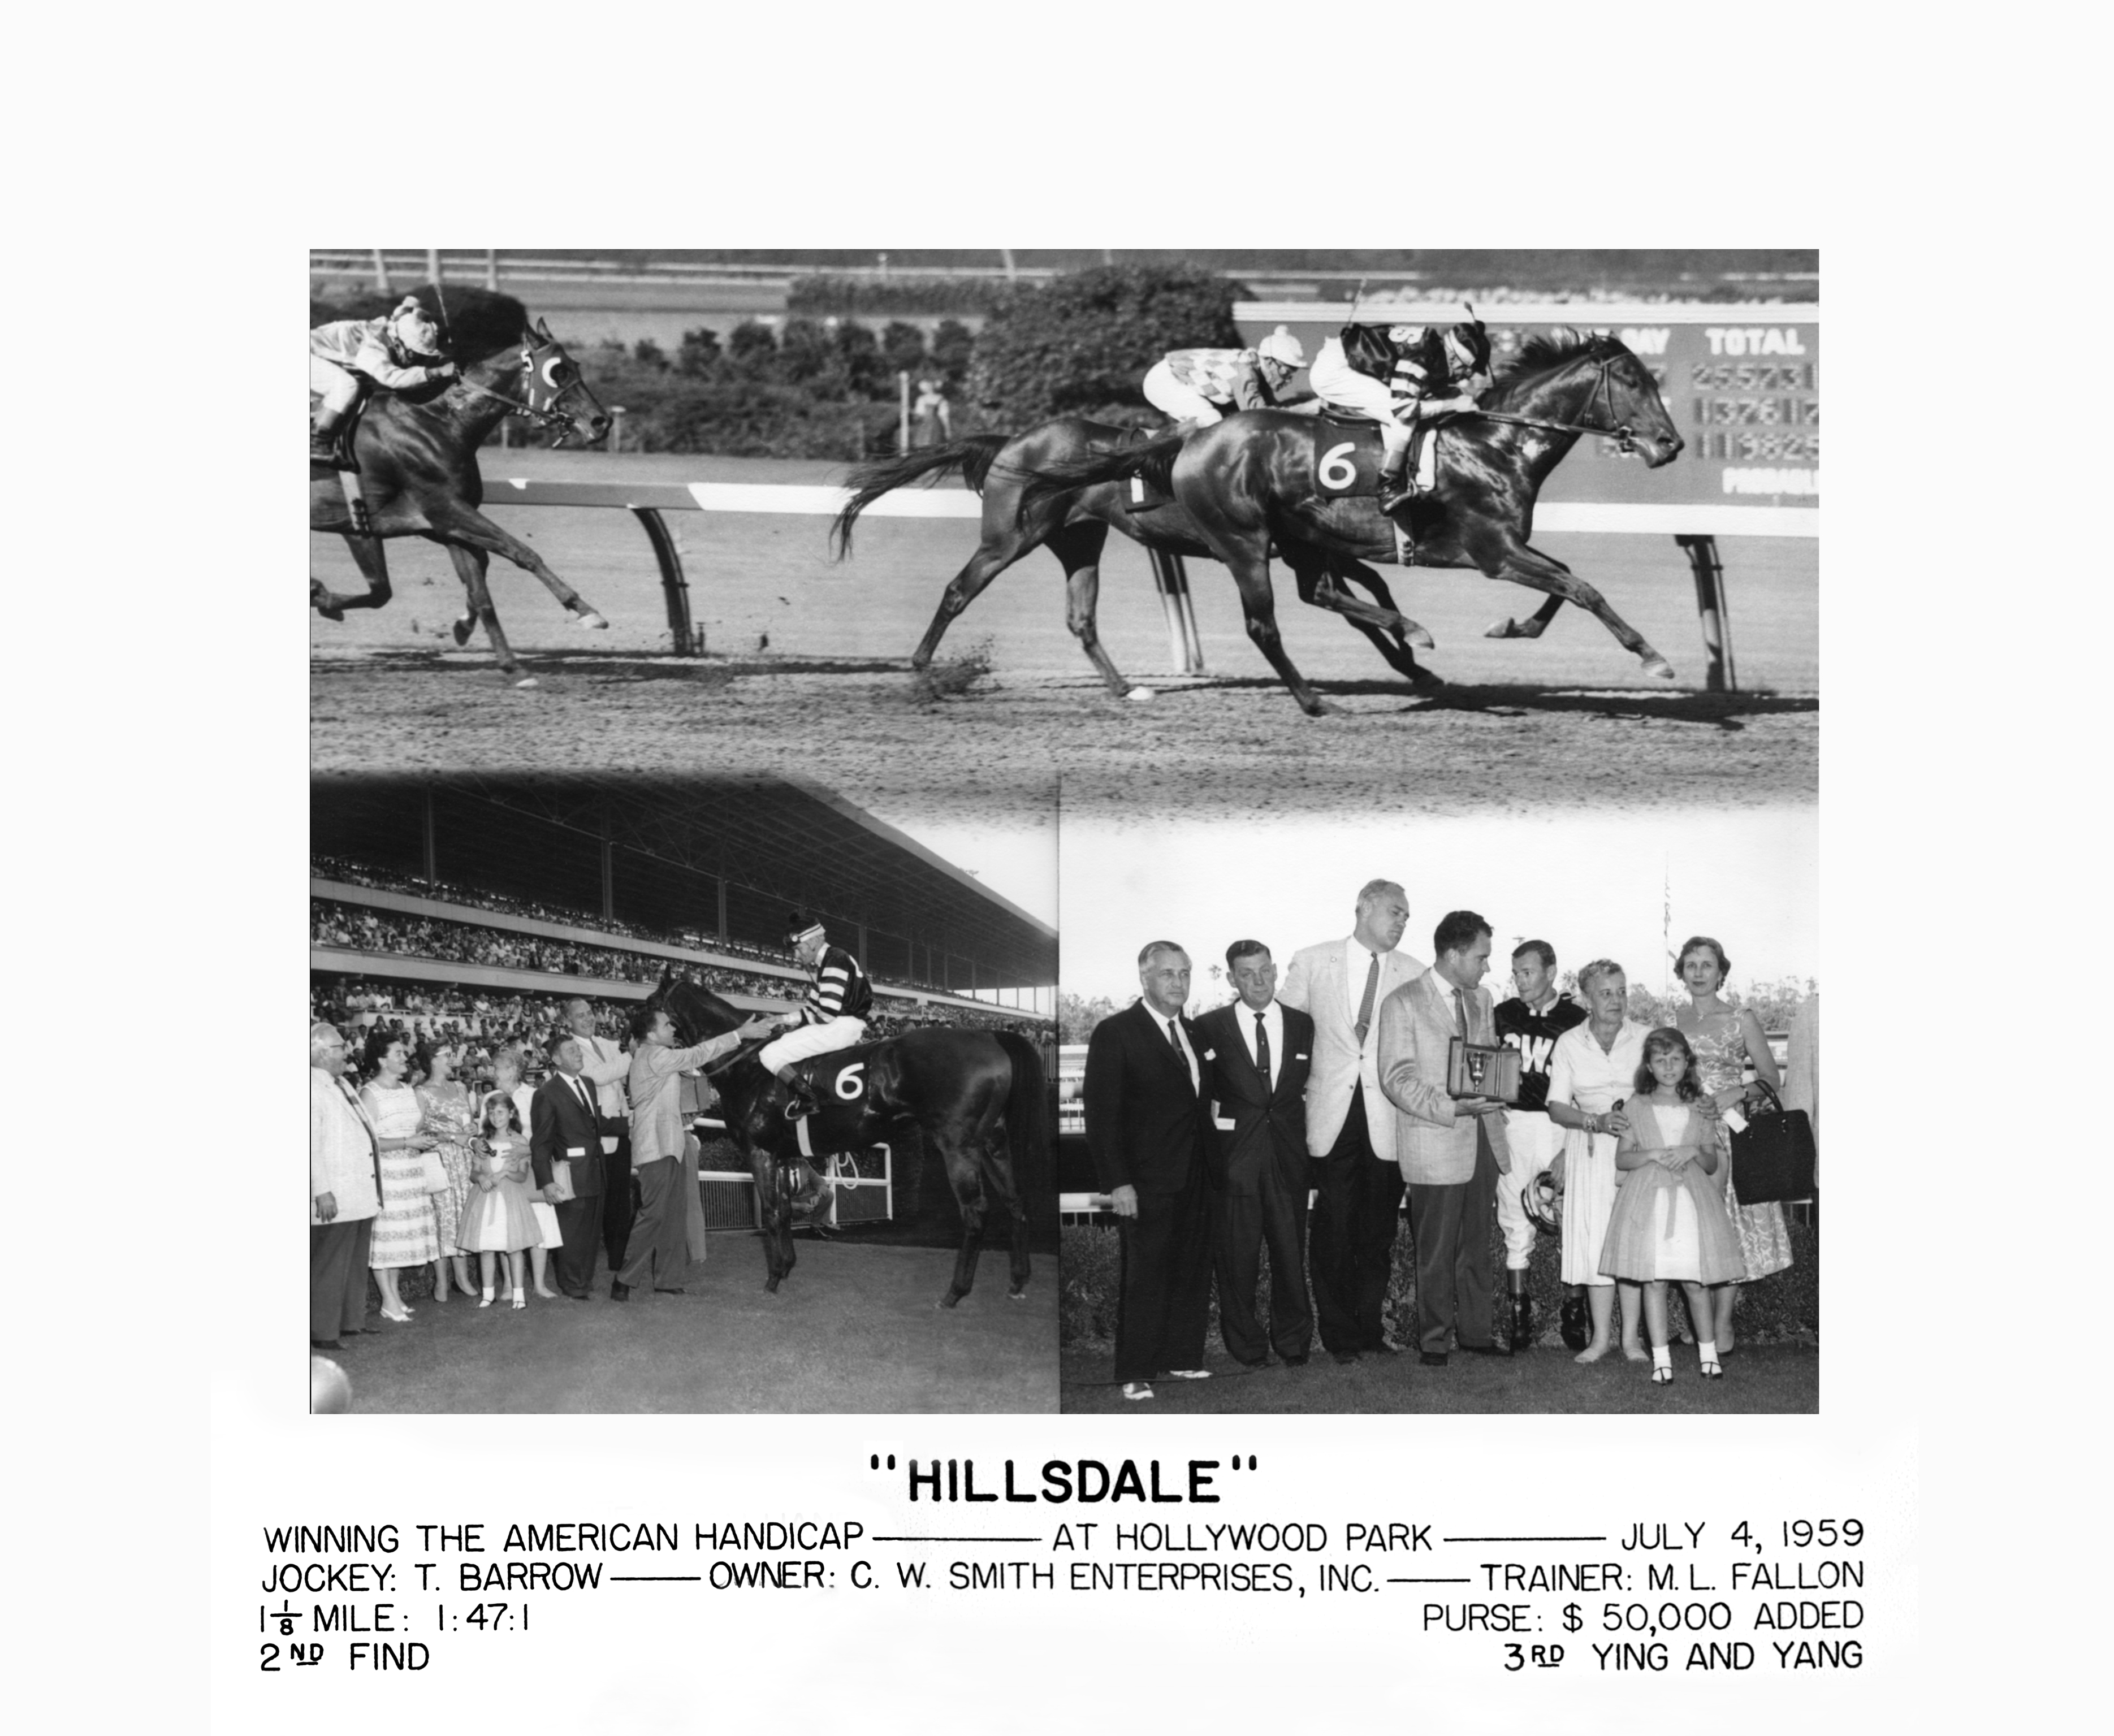 Win composite photo from the 1959 American Handicap at Hollywood Park, won by Hillsdale (Hollywood Park)